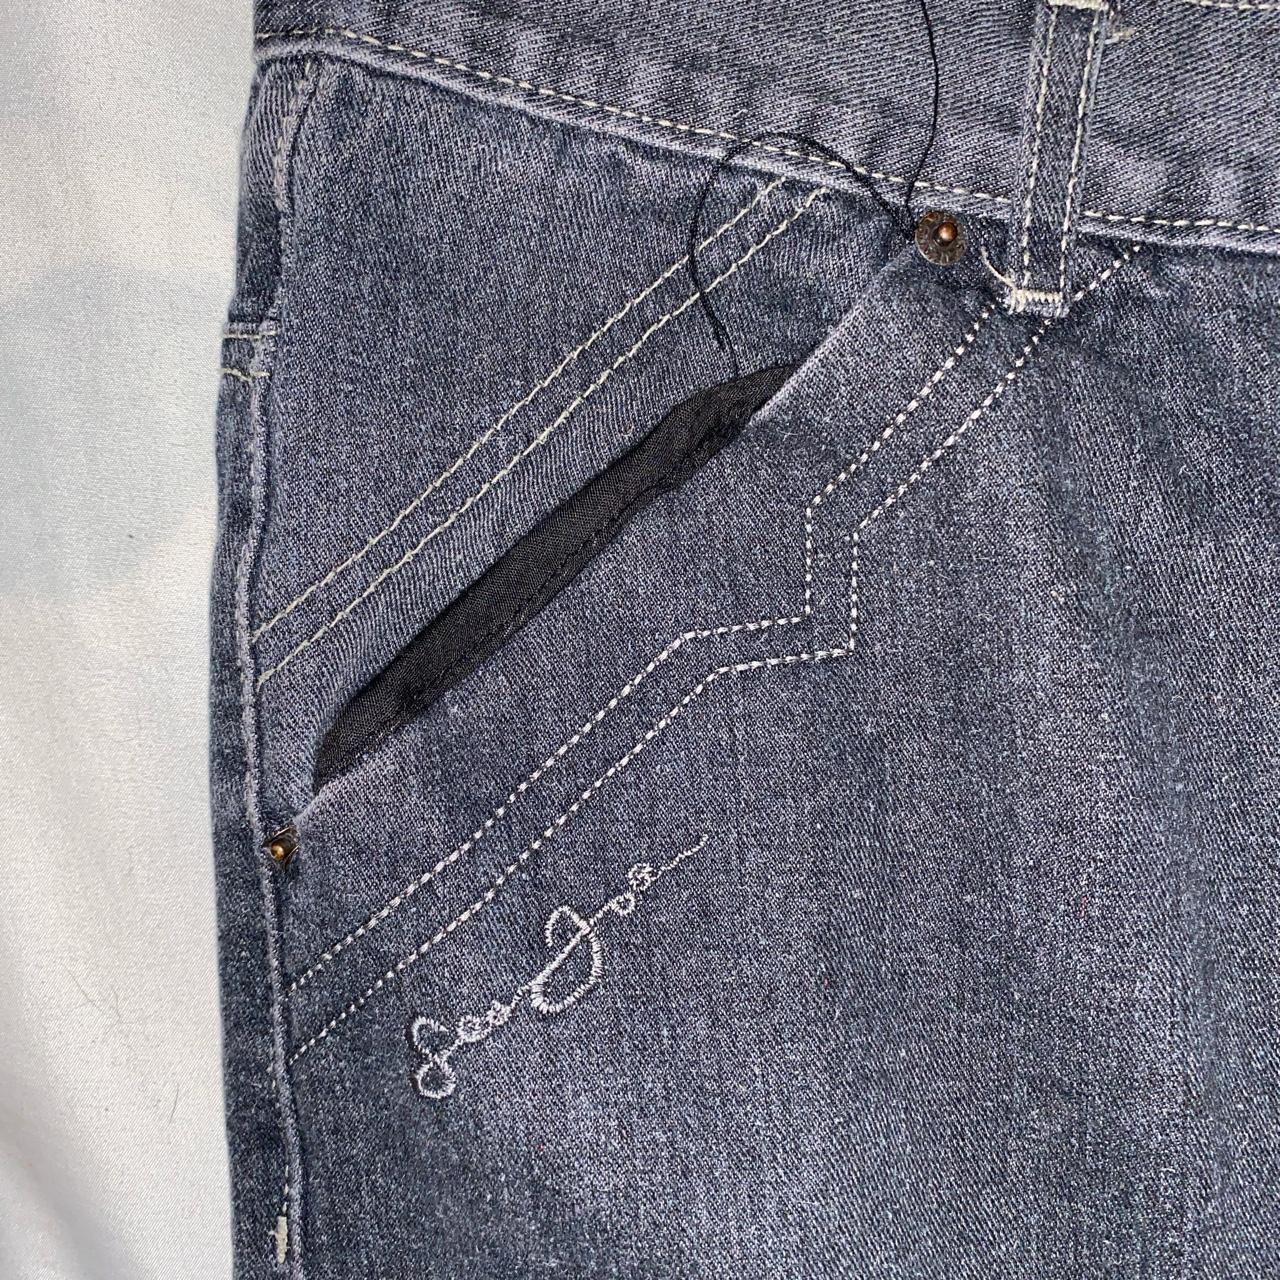 Baggy Game time jeans, little distressed with... - Depop